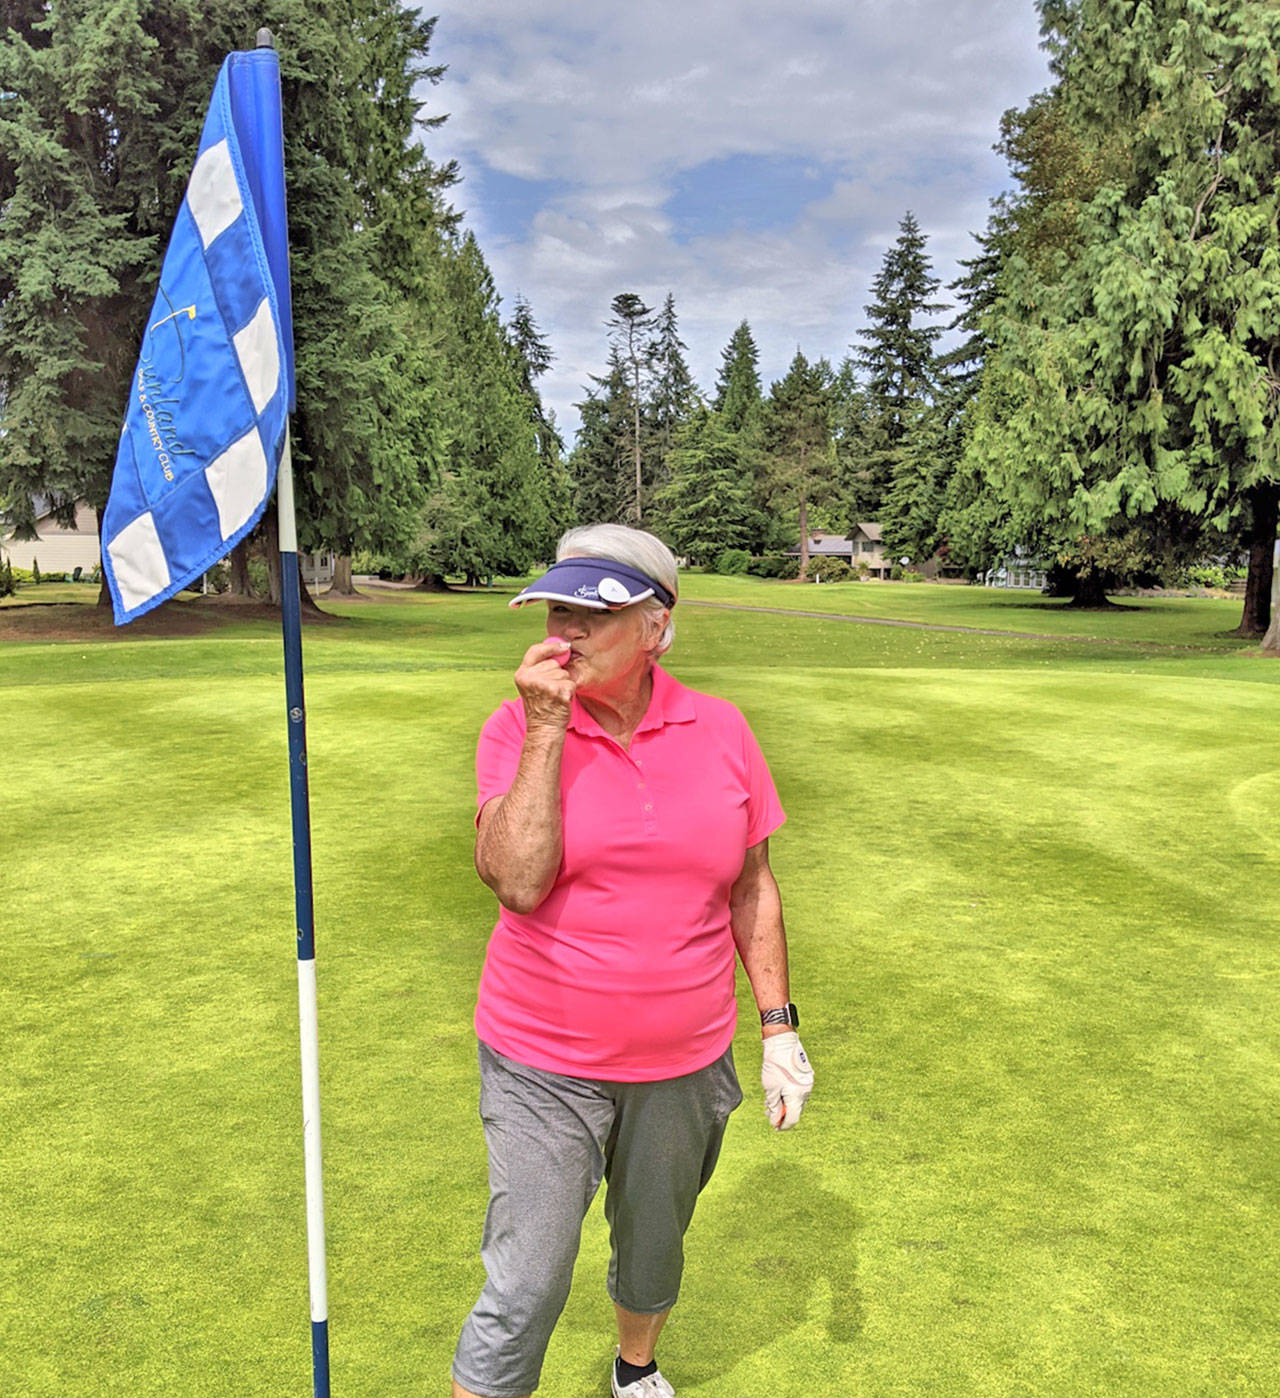 Ann Hester recorded her first ever hole-in-one last Thursday on the No. 5 hole at Sunland Golf and Country Club in Sequim.